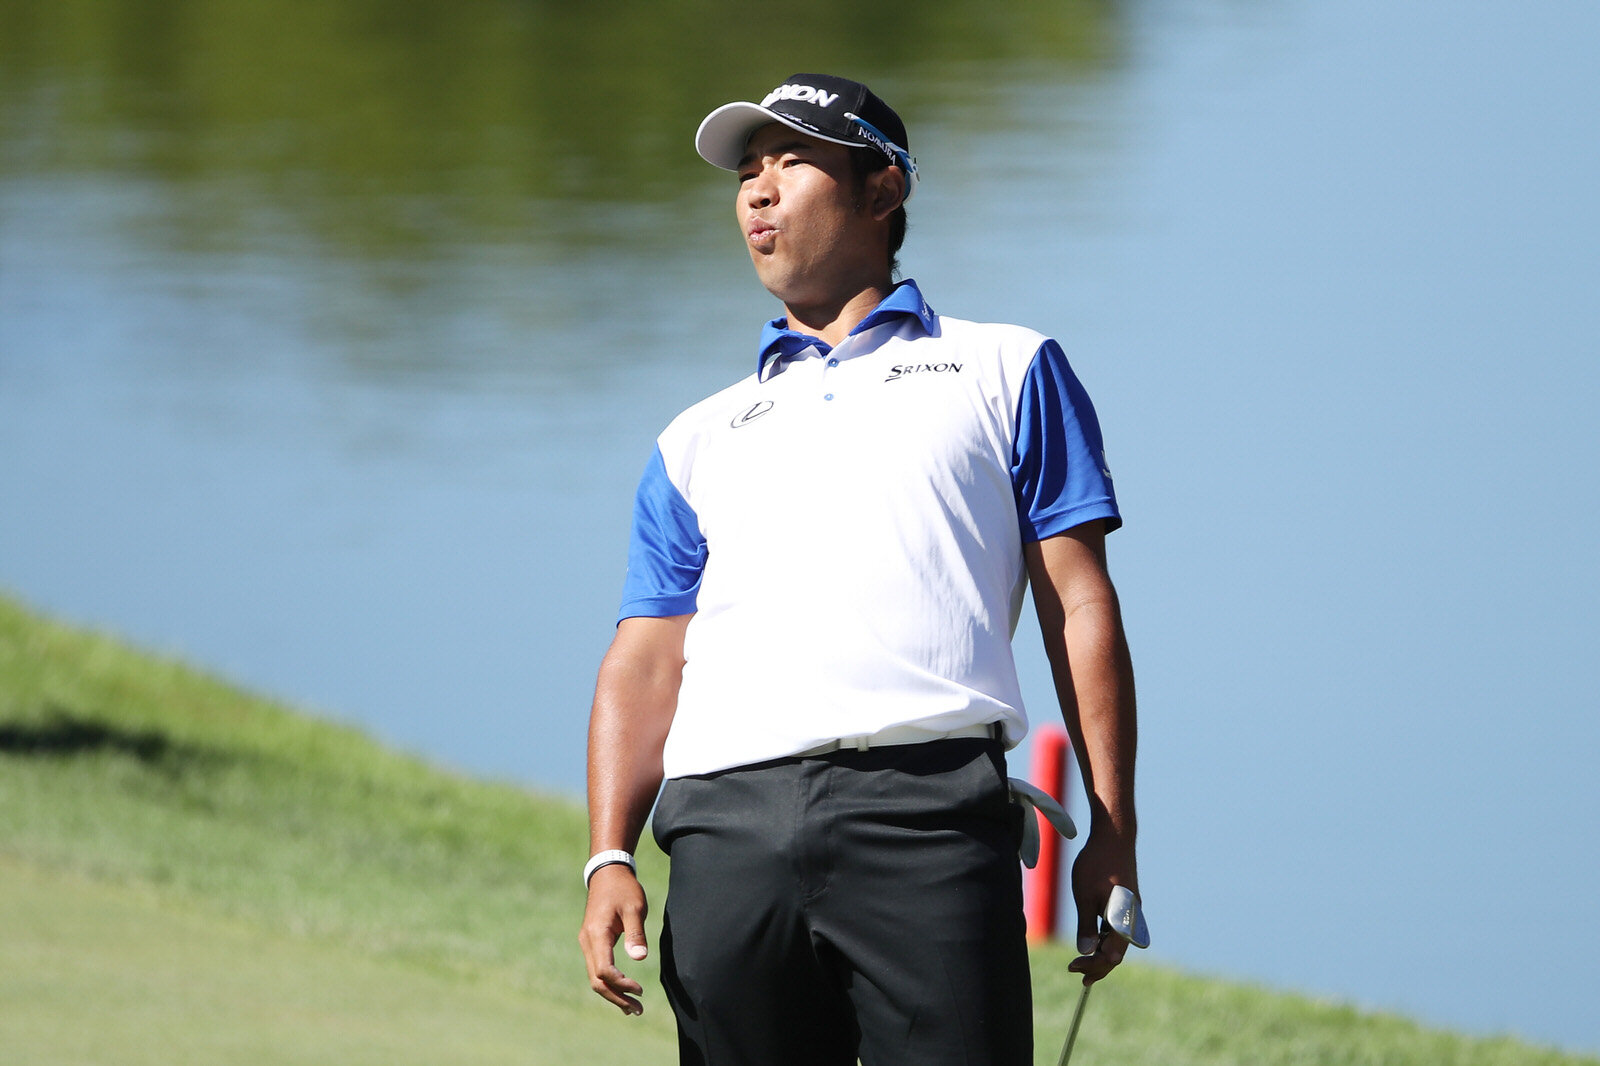  LAS VEGAS, NEVADA - OCTOBER 17: Hideki Matsuyama of Japan reacts to a shot on the fourth hole during the third round of The CJ Cup @ Shadow Creek on October 17, 2020 in Las Vegas, Nevada. (Photo by Christian Petersen/Getty Images) 